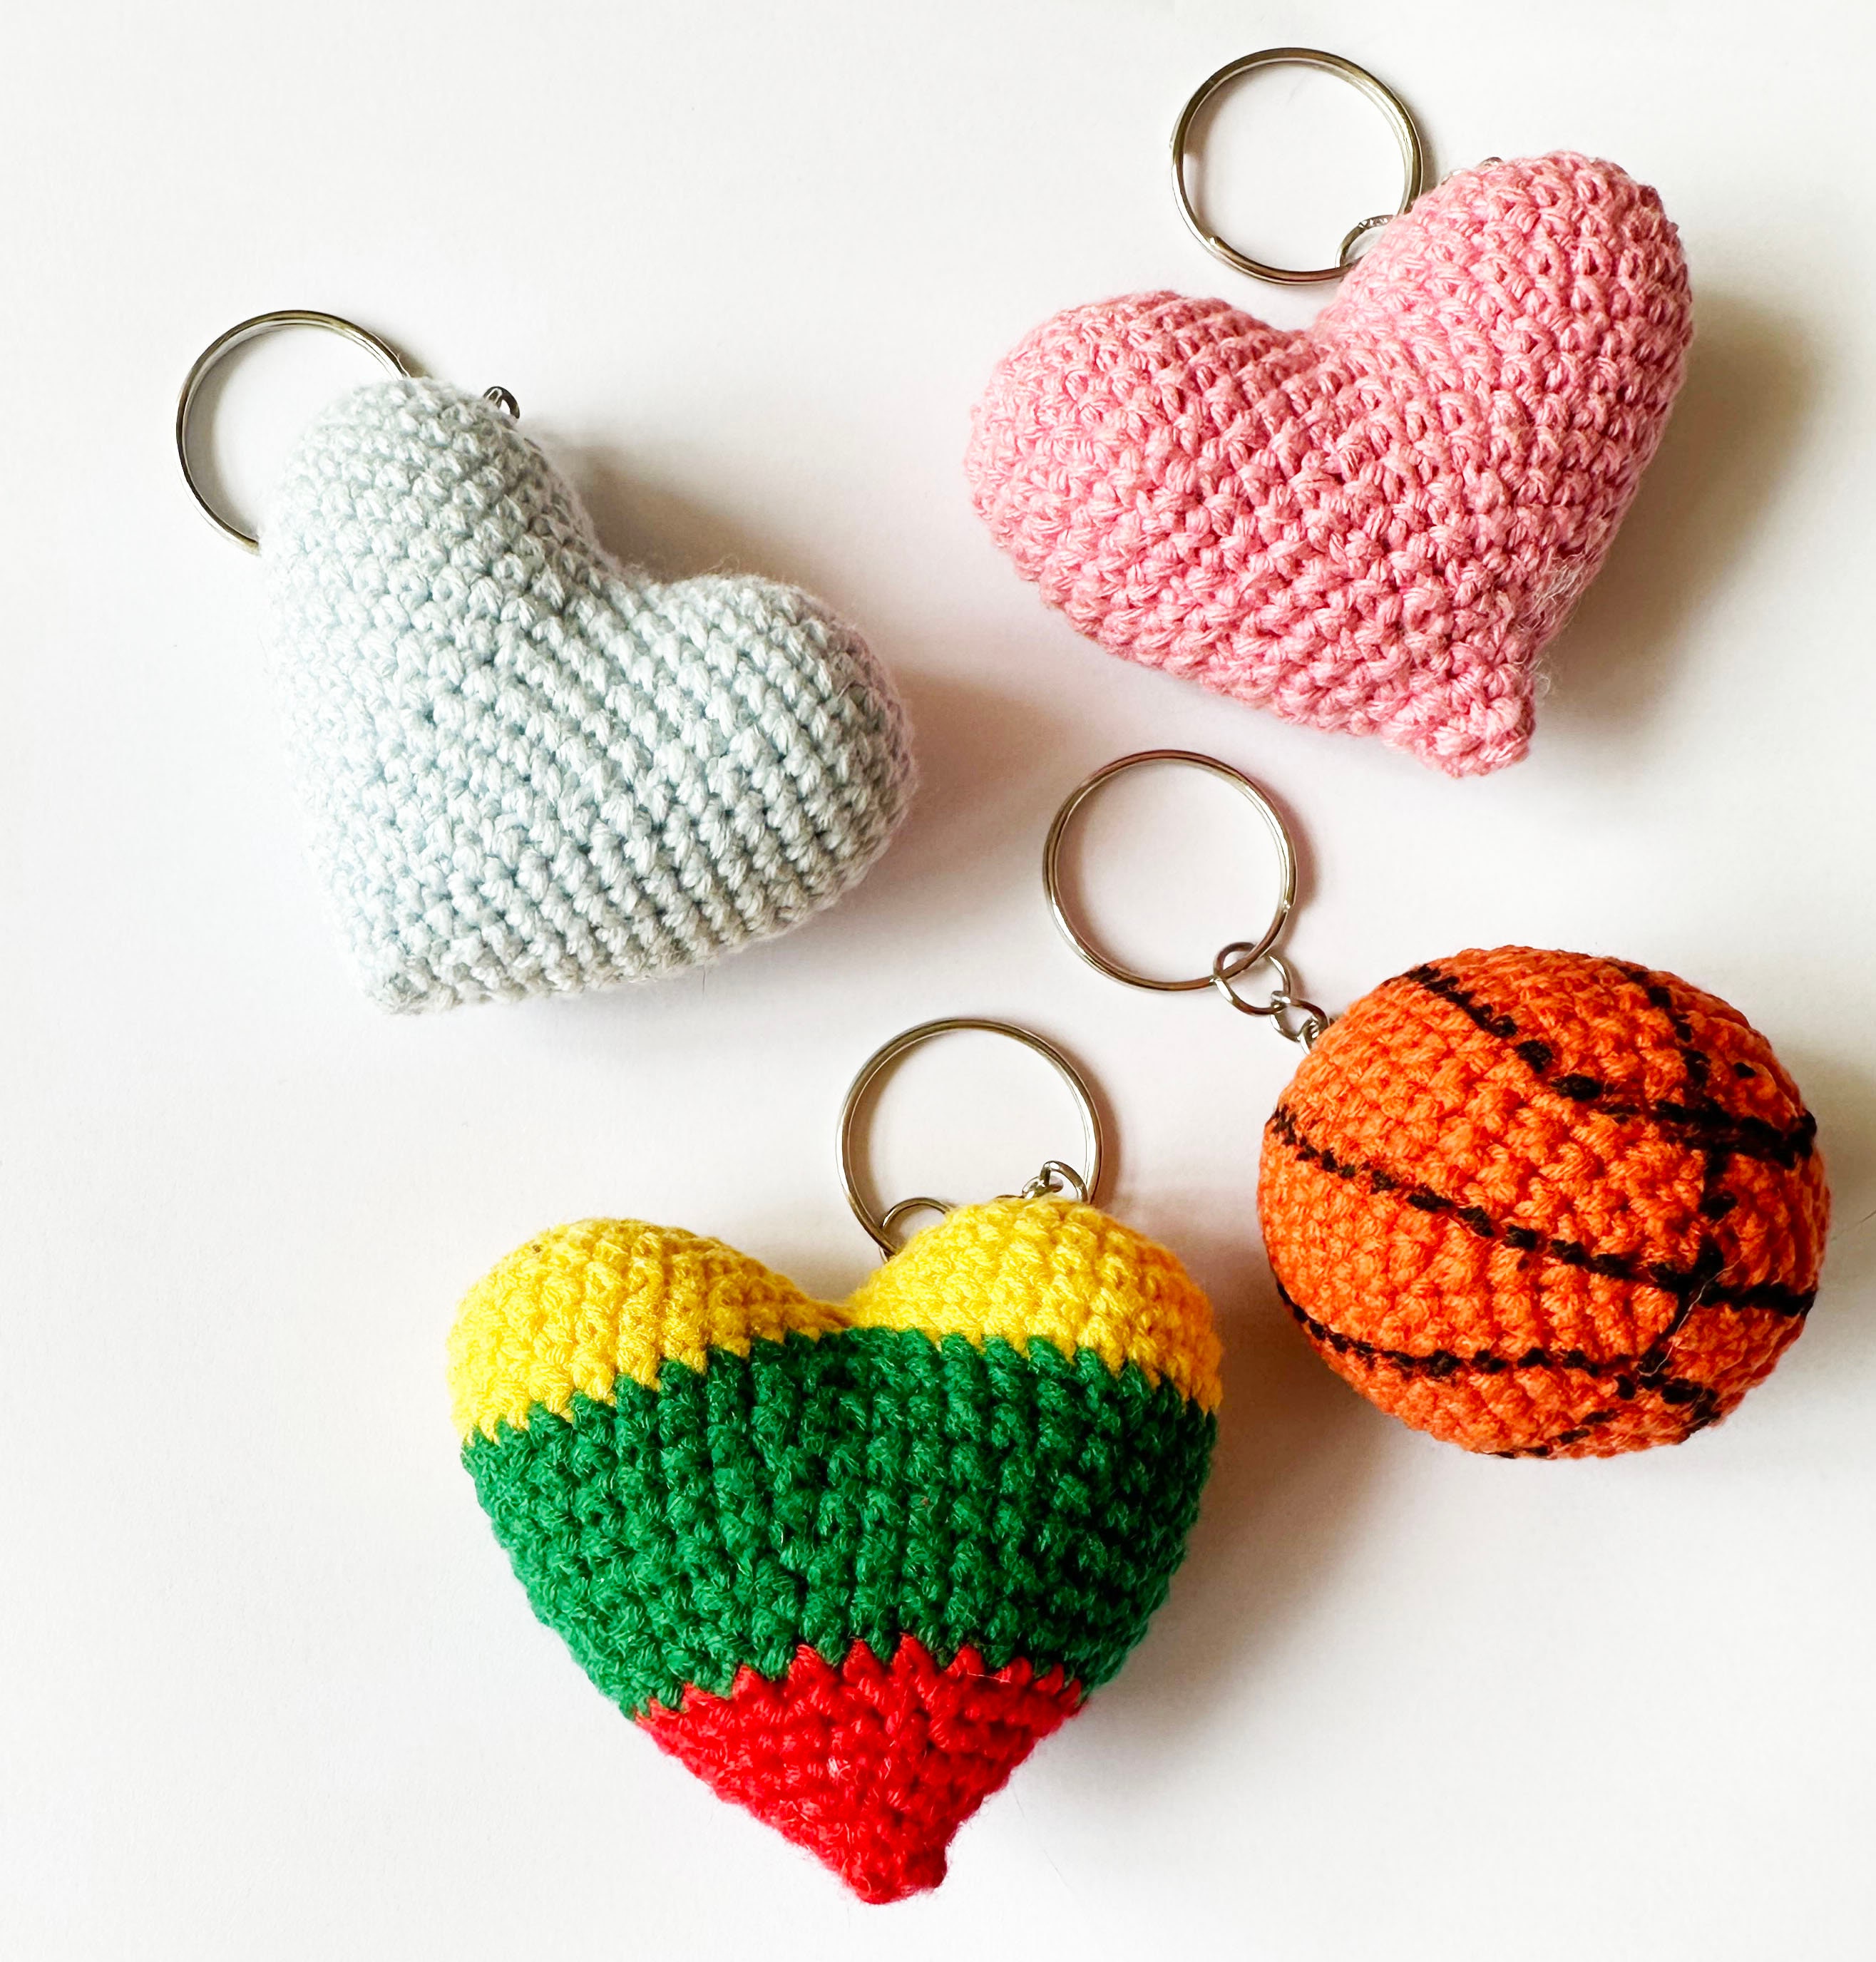 10pcs New Simulated Woolen Yarn Resin Charms For Jewelry Making Diy Fashion  Earring Pendant Keychain Floating Charm Craft